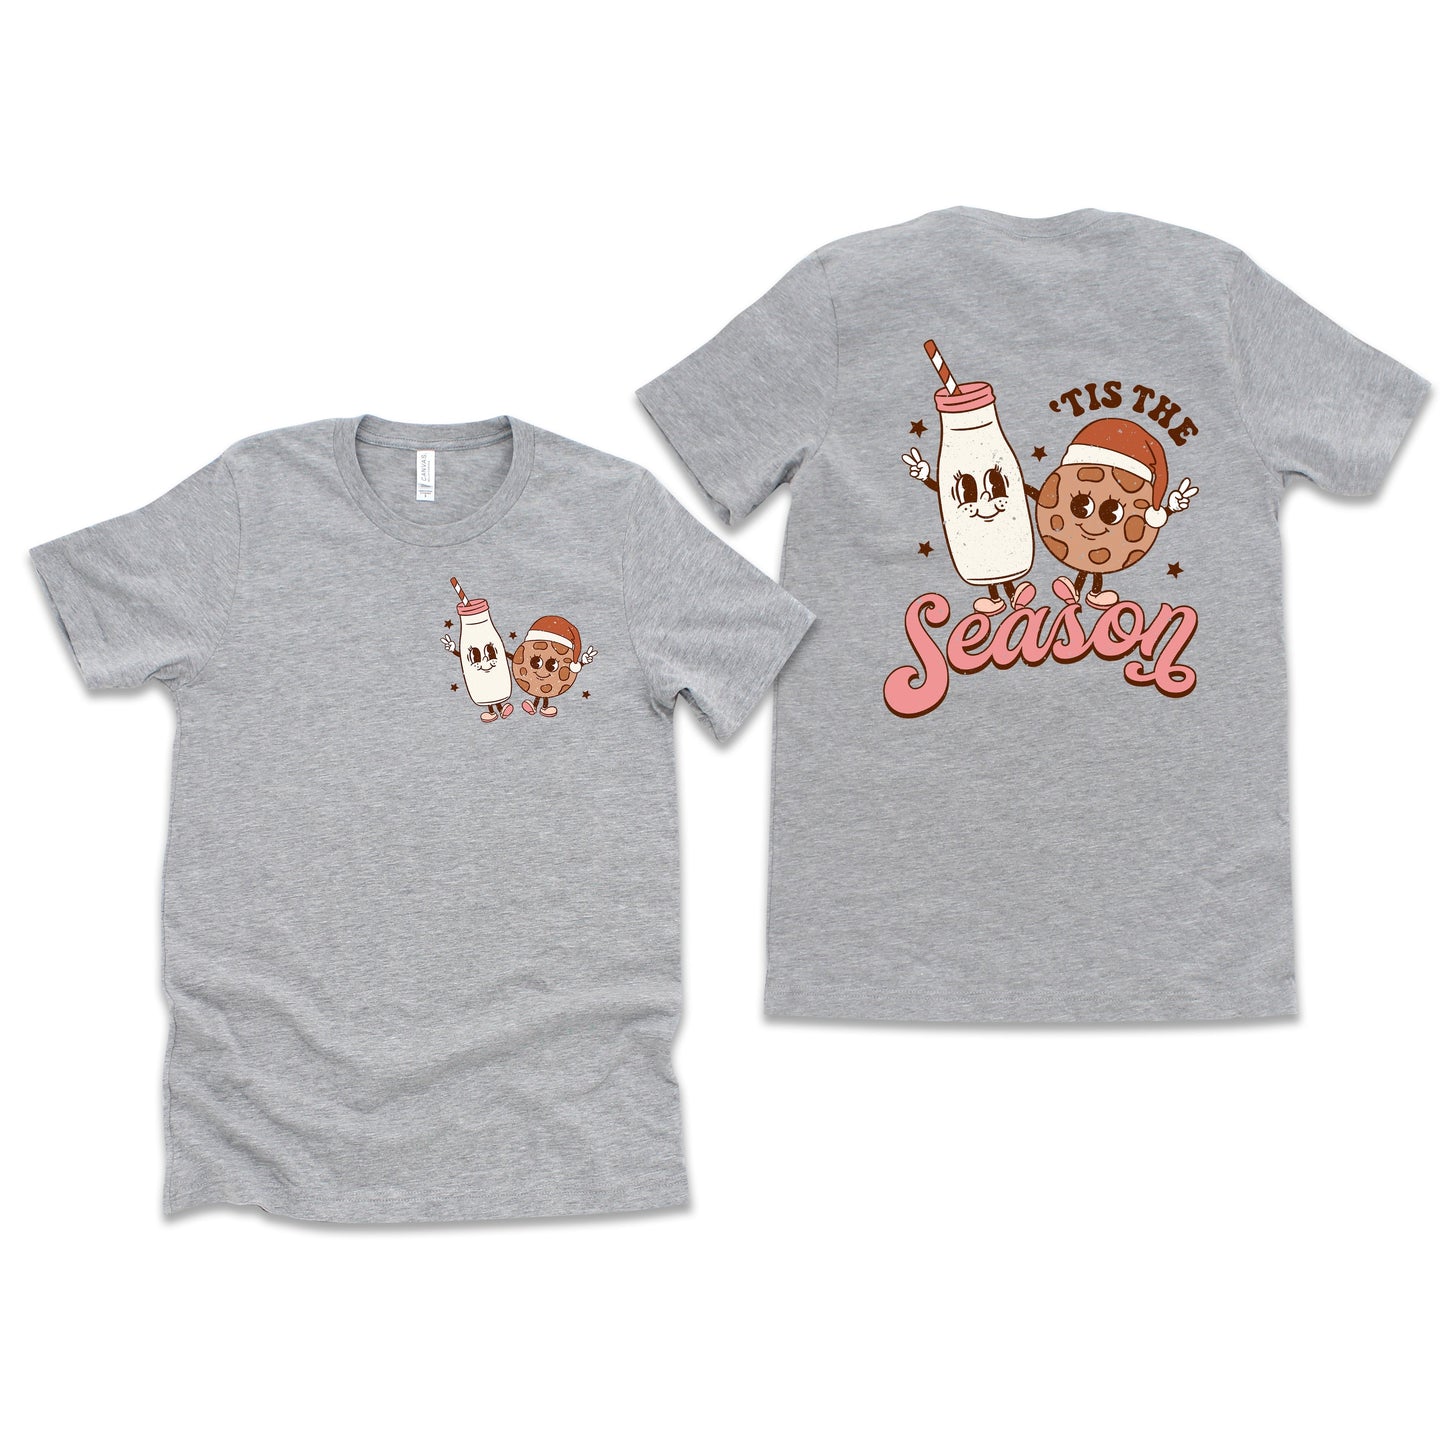 Tis The Season Cookies | Short Sleeve Crew Neck | Front And Back Ink